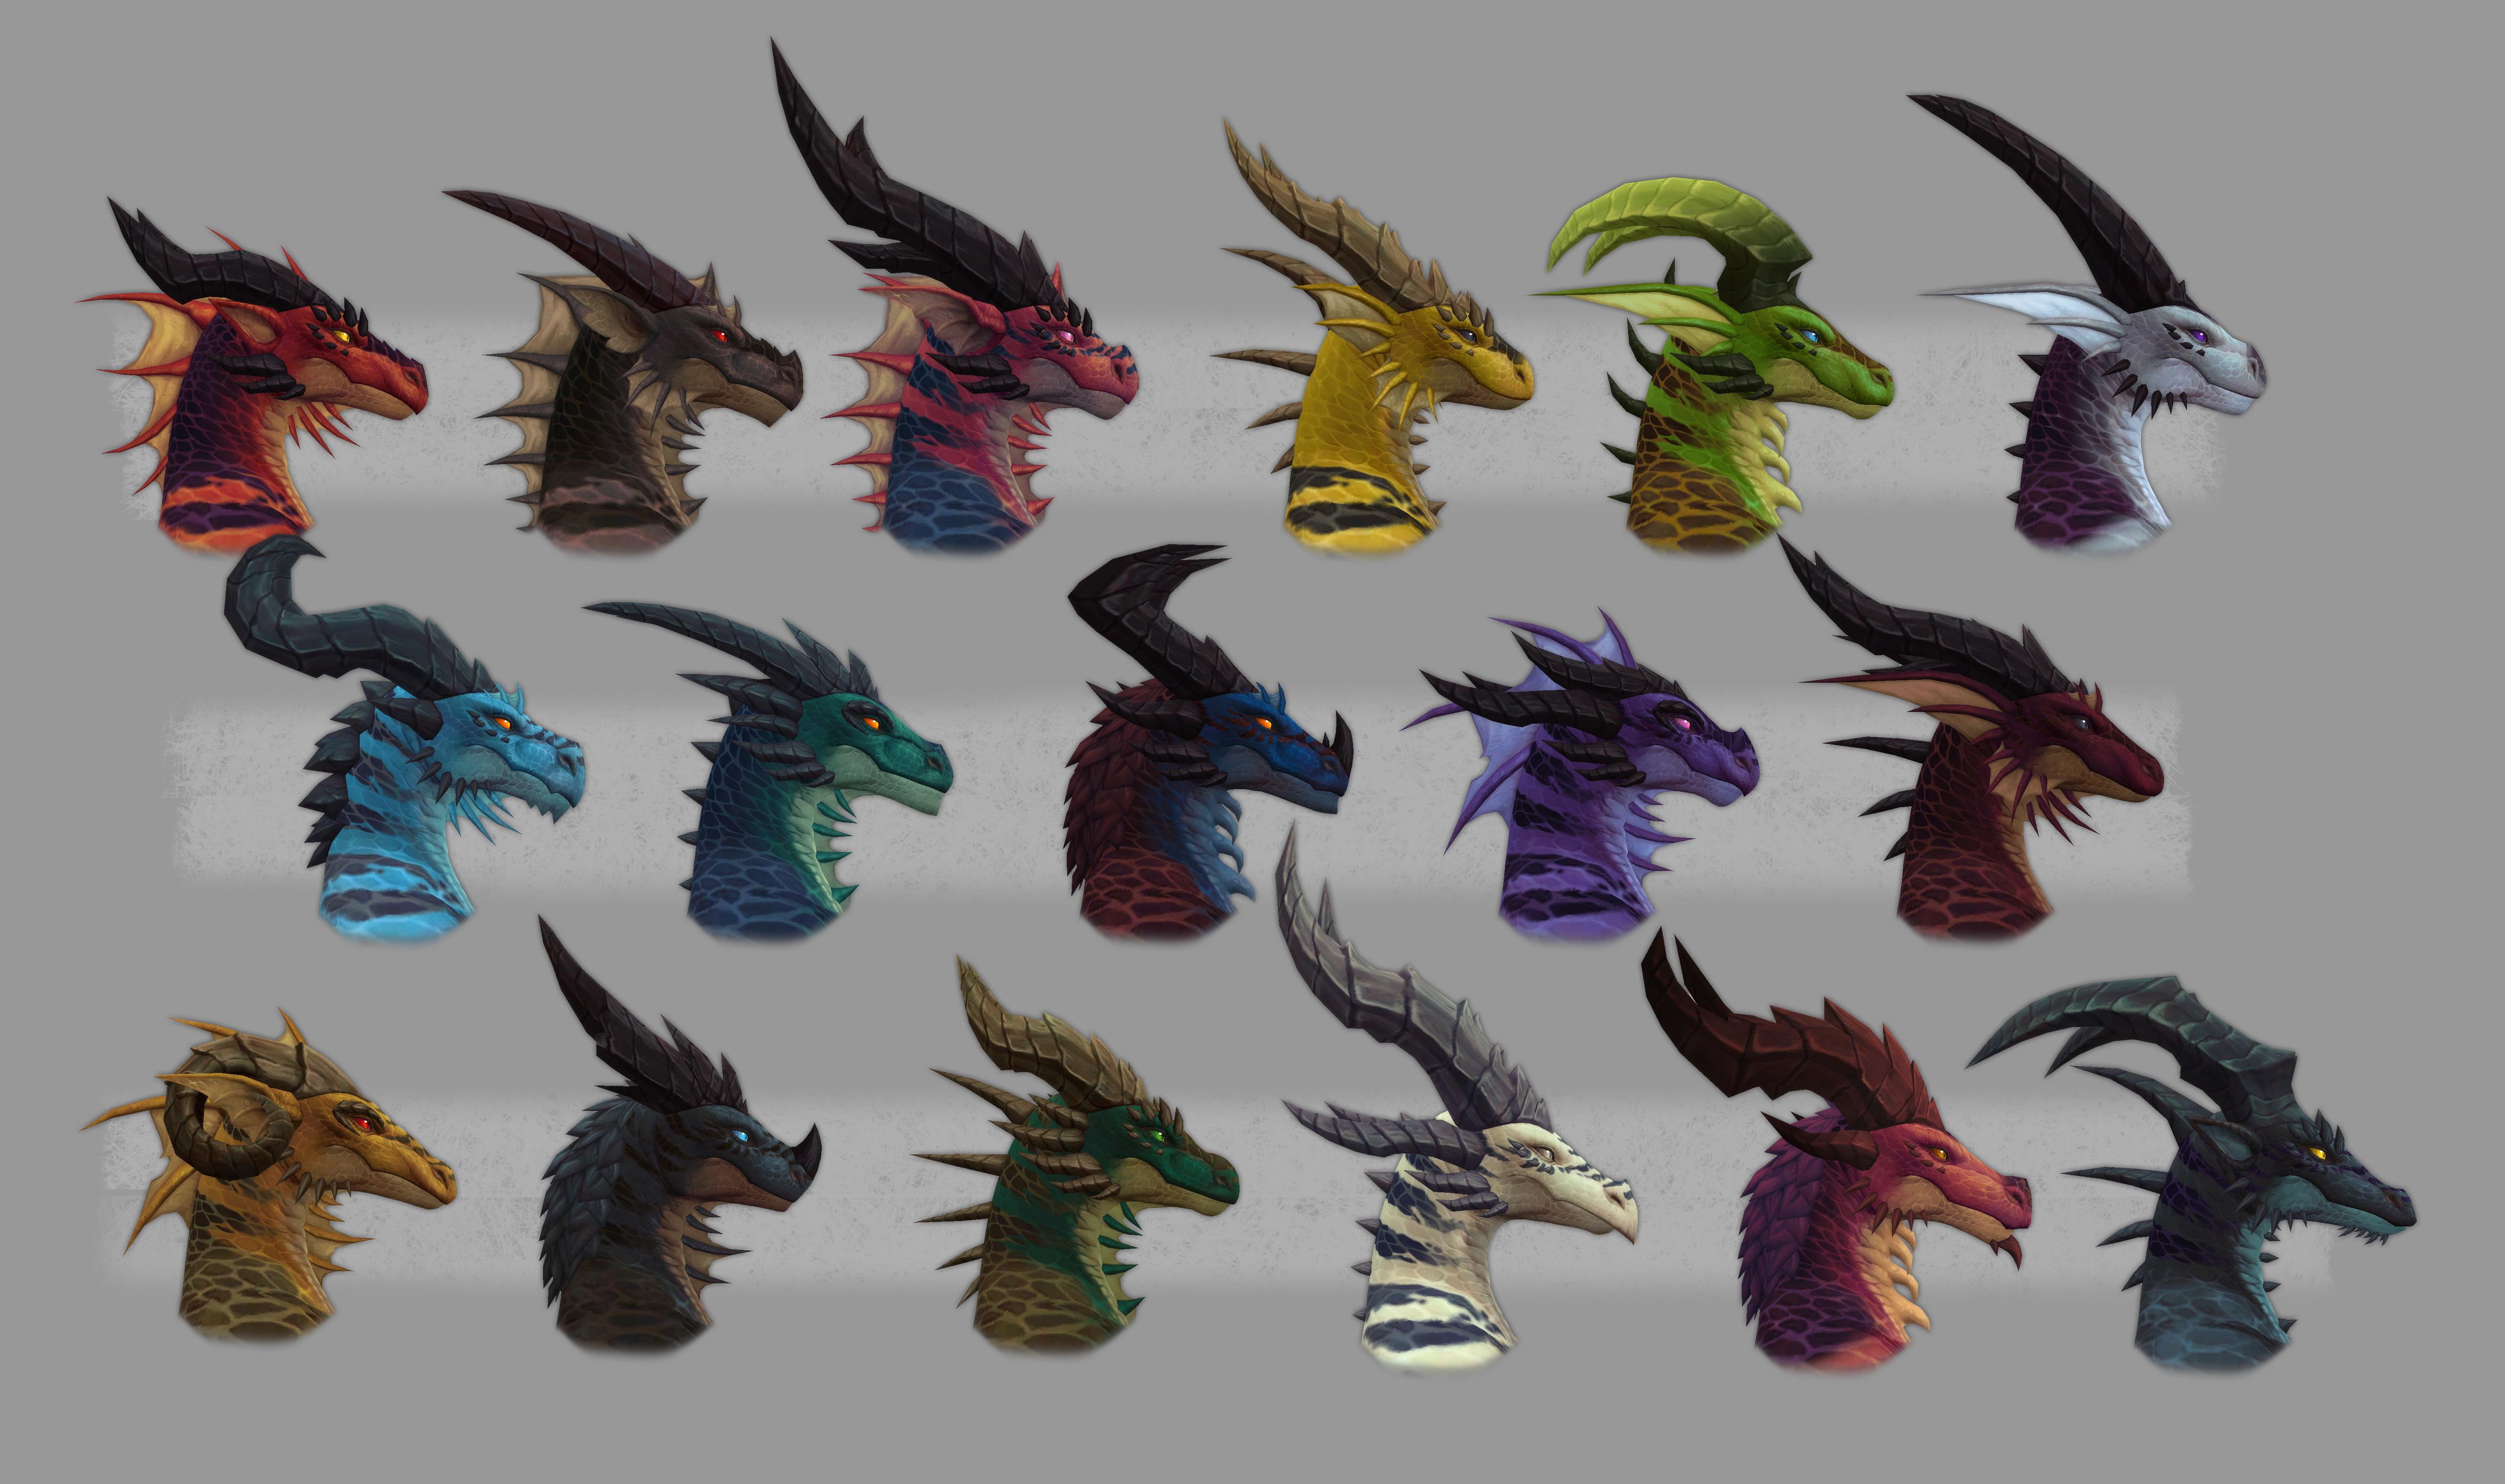 A variety of different colored Dracthyr heads with different hornes and features